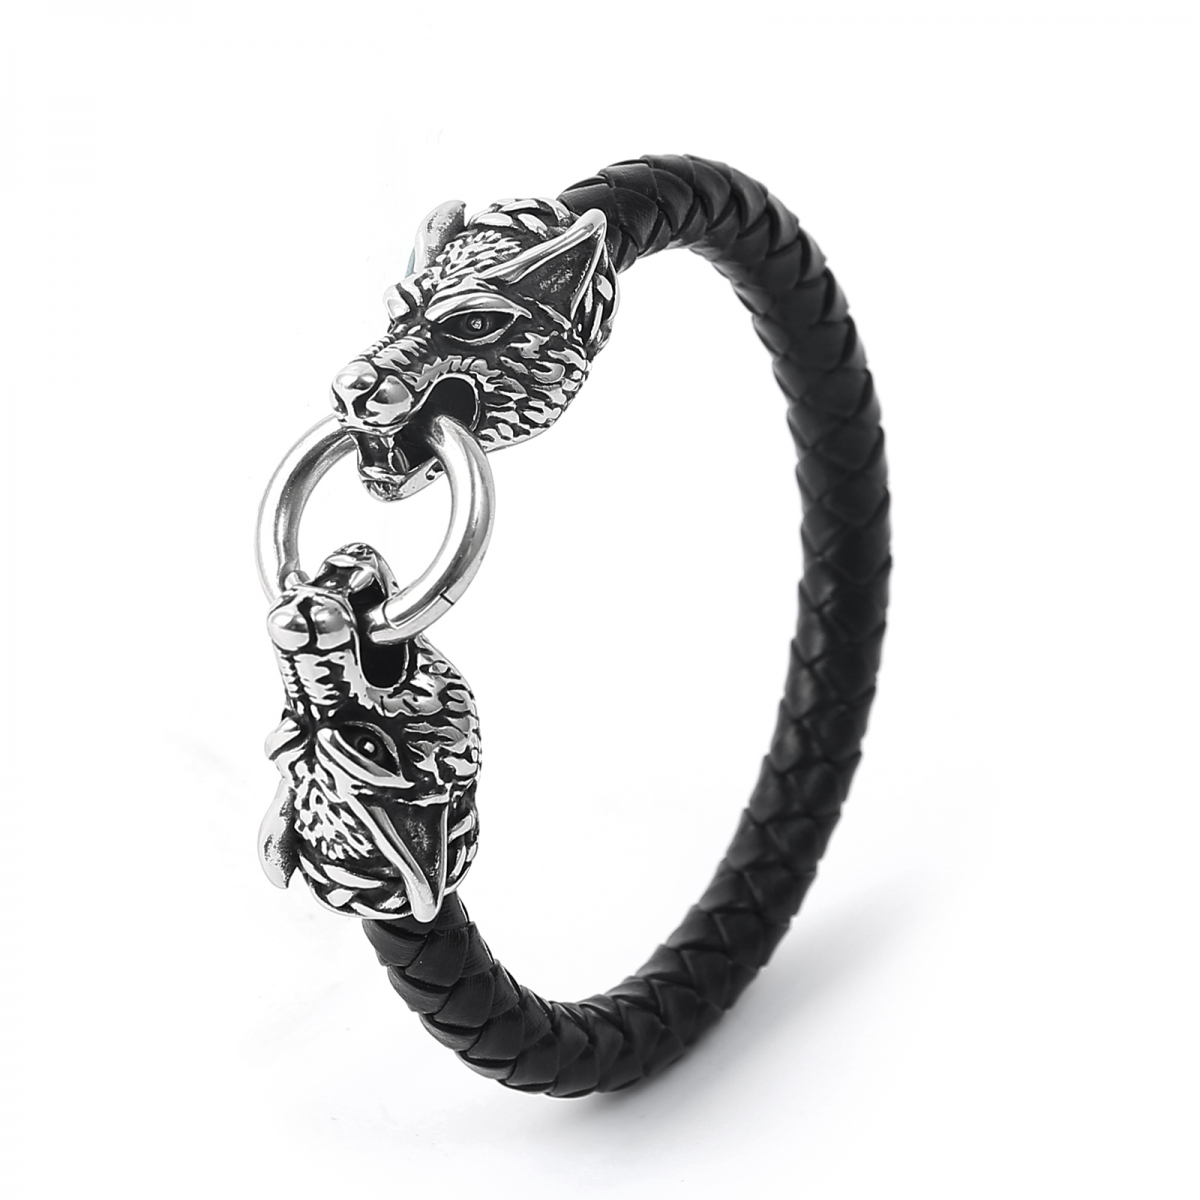 Wolf Bracelet Genuine Leather US$4.7/PC-NORSECOLLECTION- Viking Jewelry,Viking Necklace,Viking Bracelet,Viking Rings,Viking Mugs,Viking Accessories,Viking Crafts